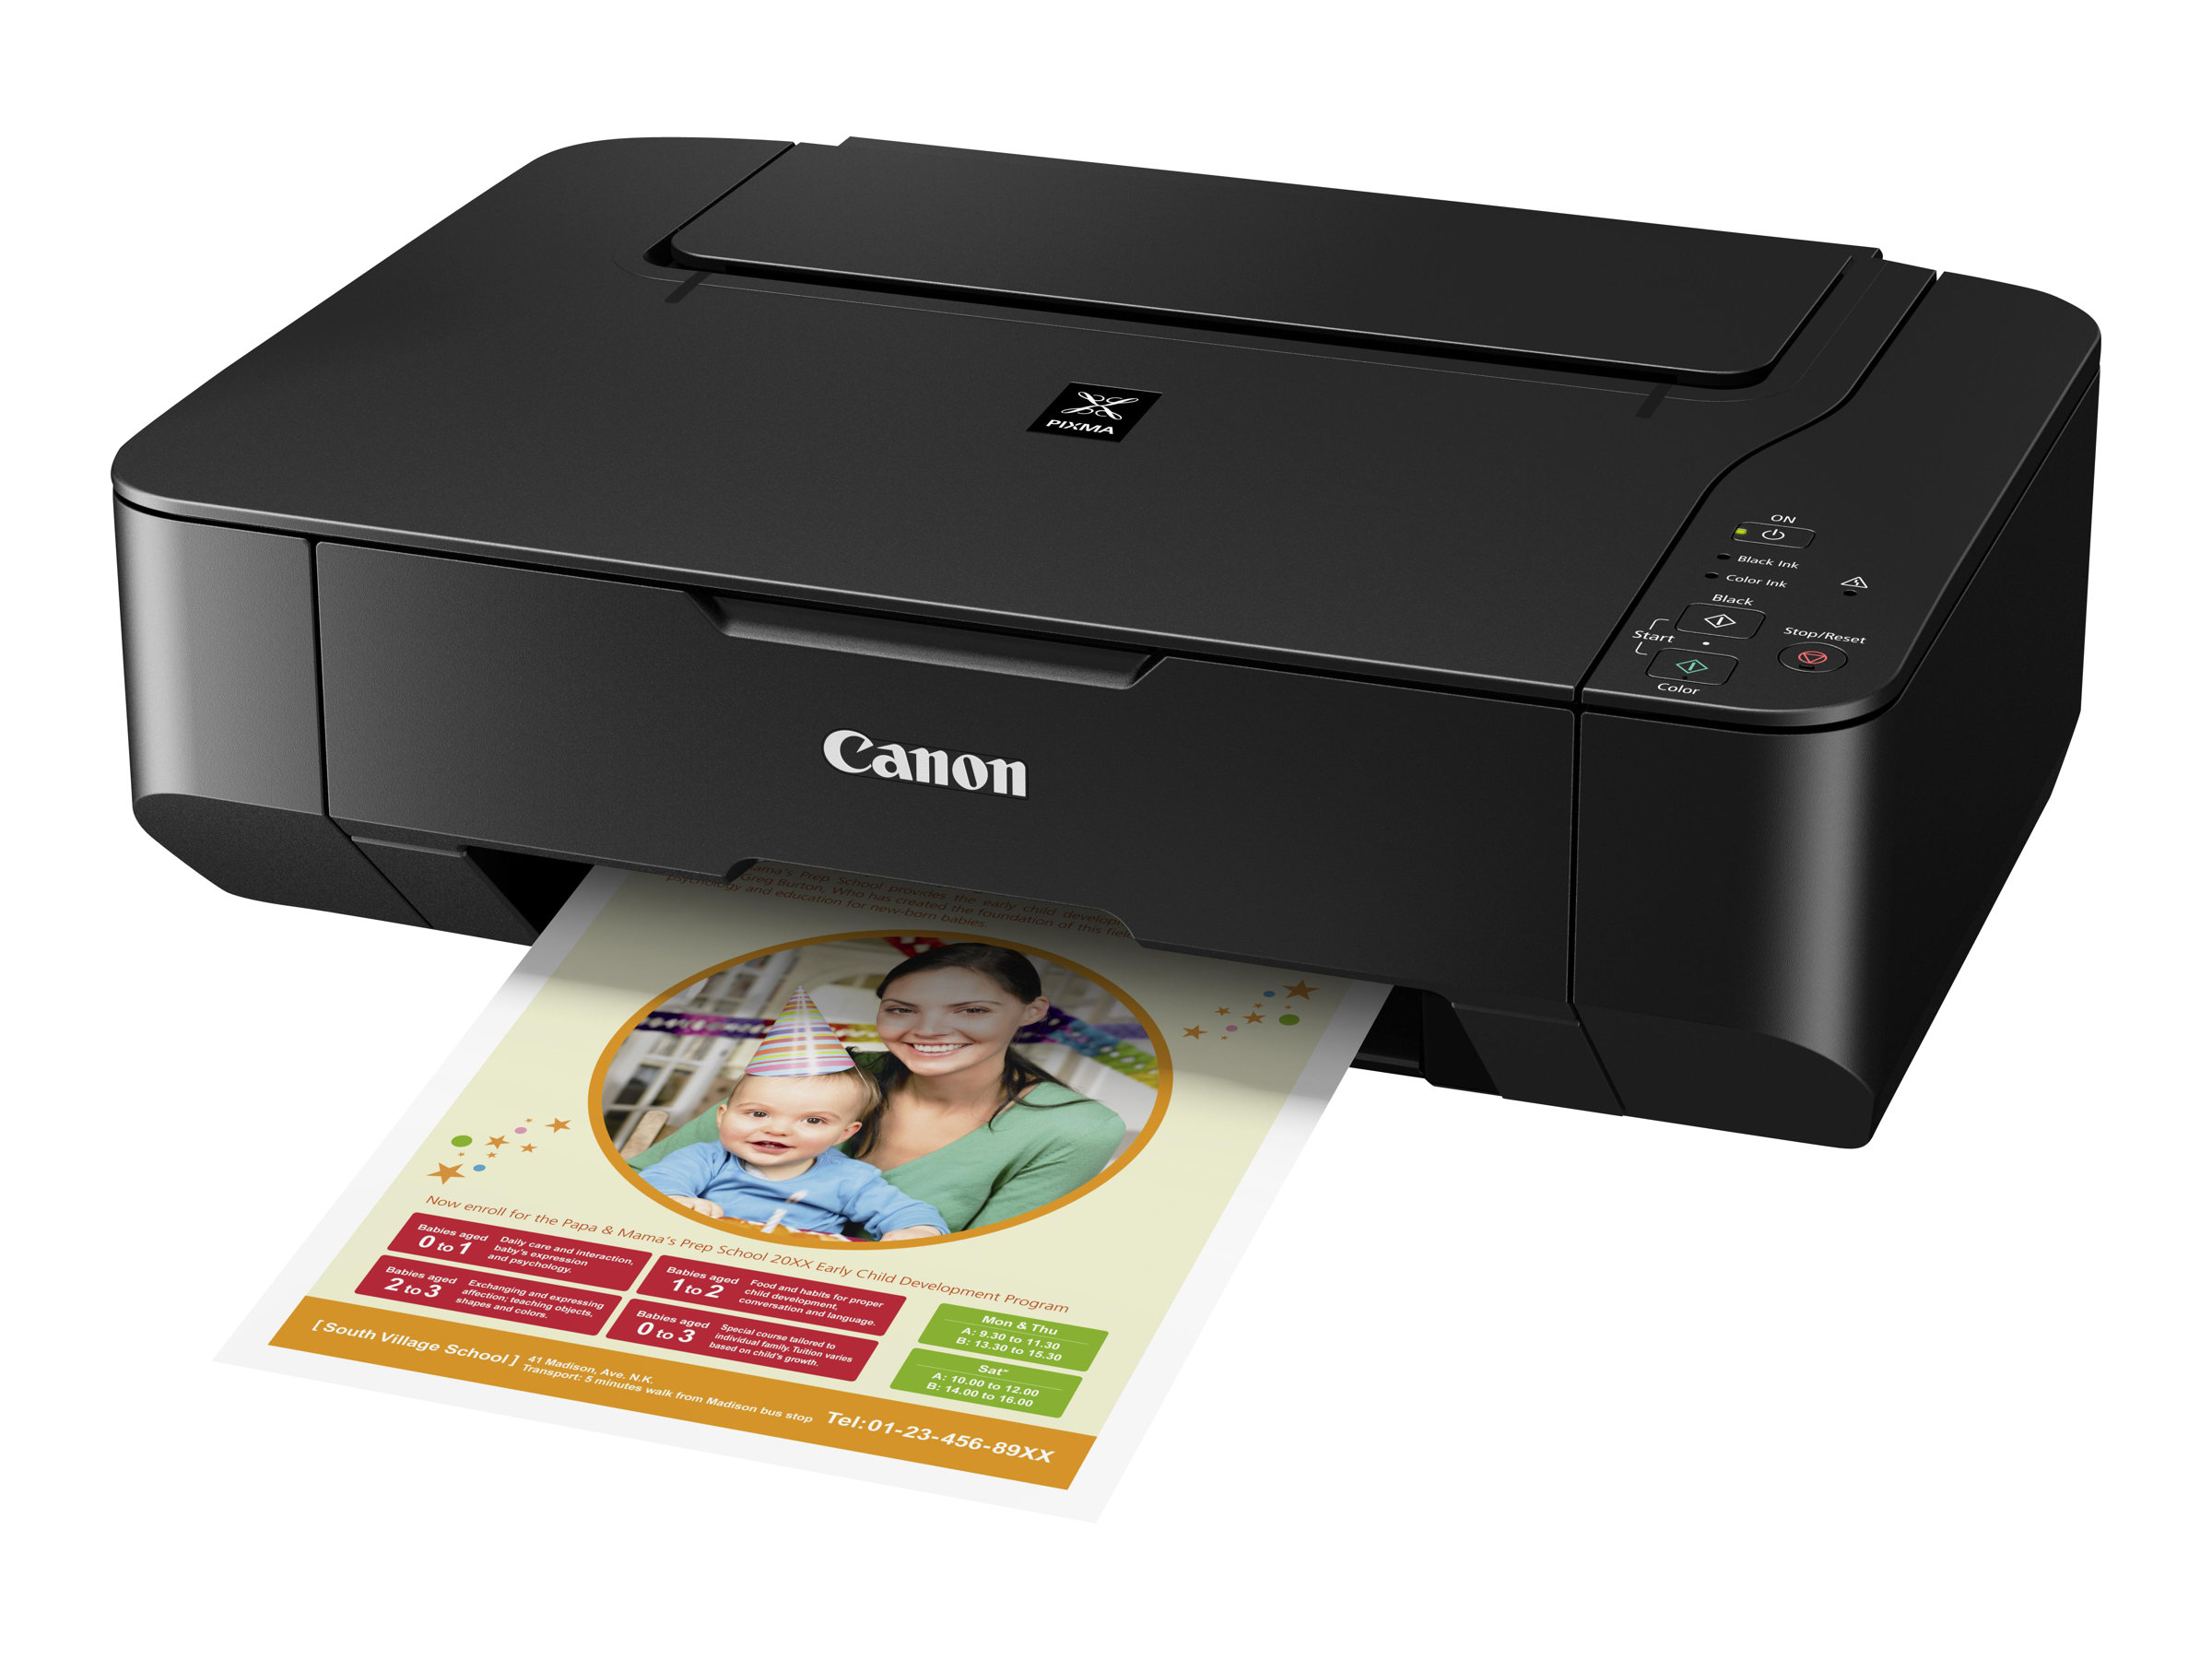 Canon PIXMA MP230 - Multifunction printer - color - ink-jet - 8.5 in x 11.7 in (original) - Legal (media) - up to 7 ipm (printing) - 100 sheets - USB 2.0 - image 1 of 3